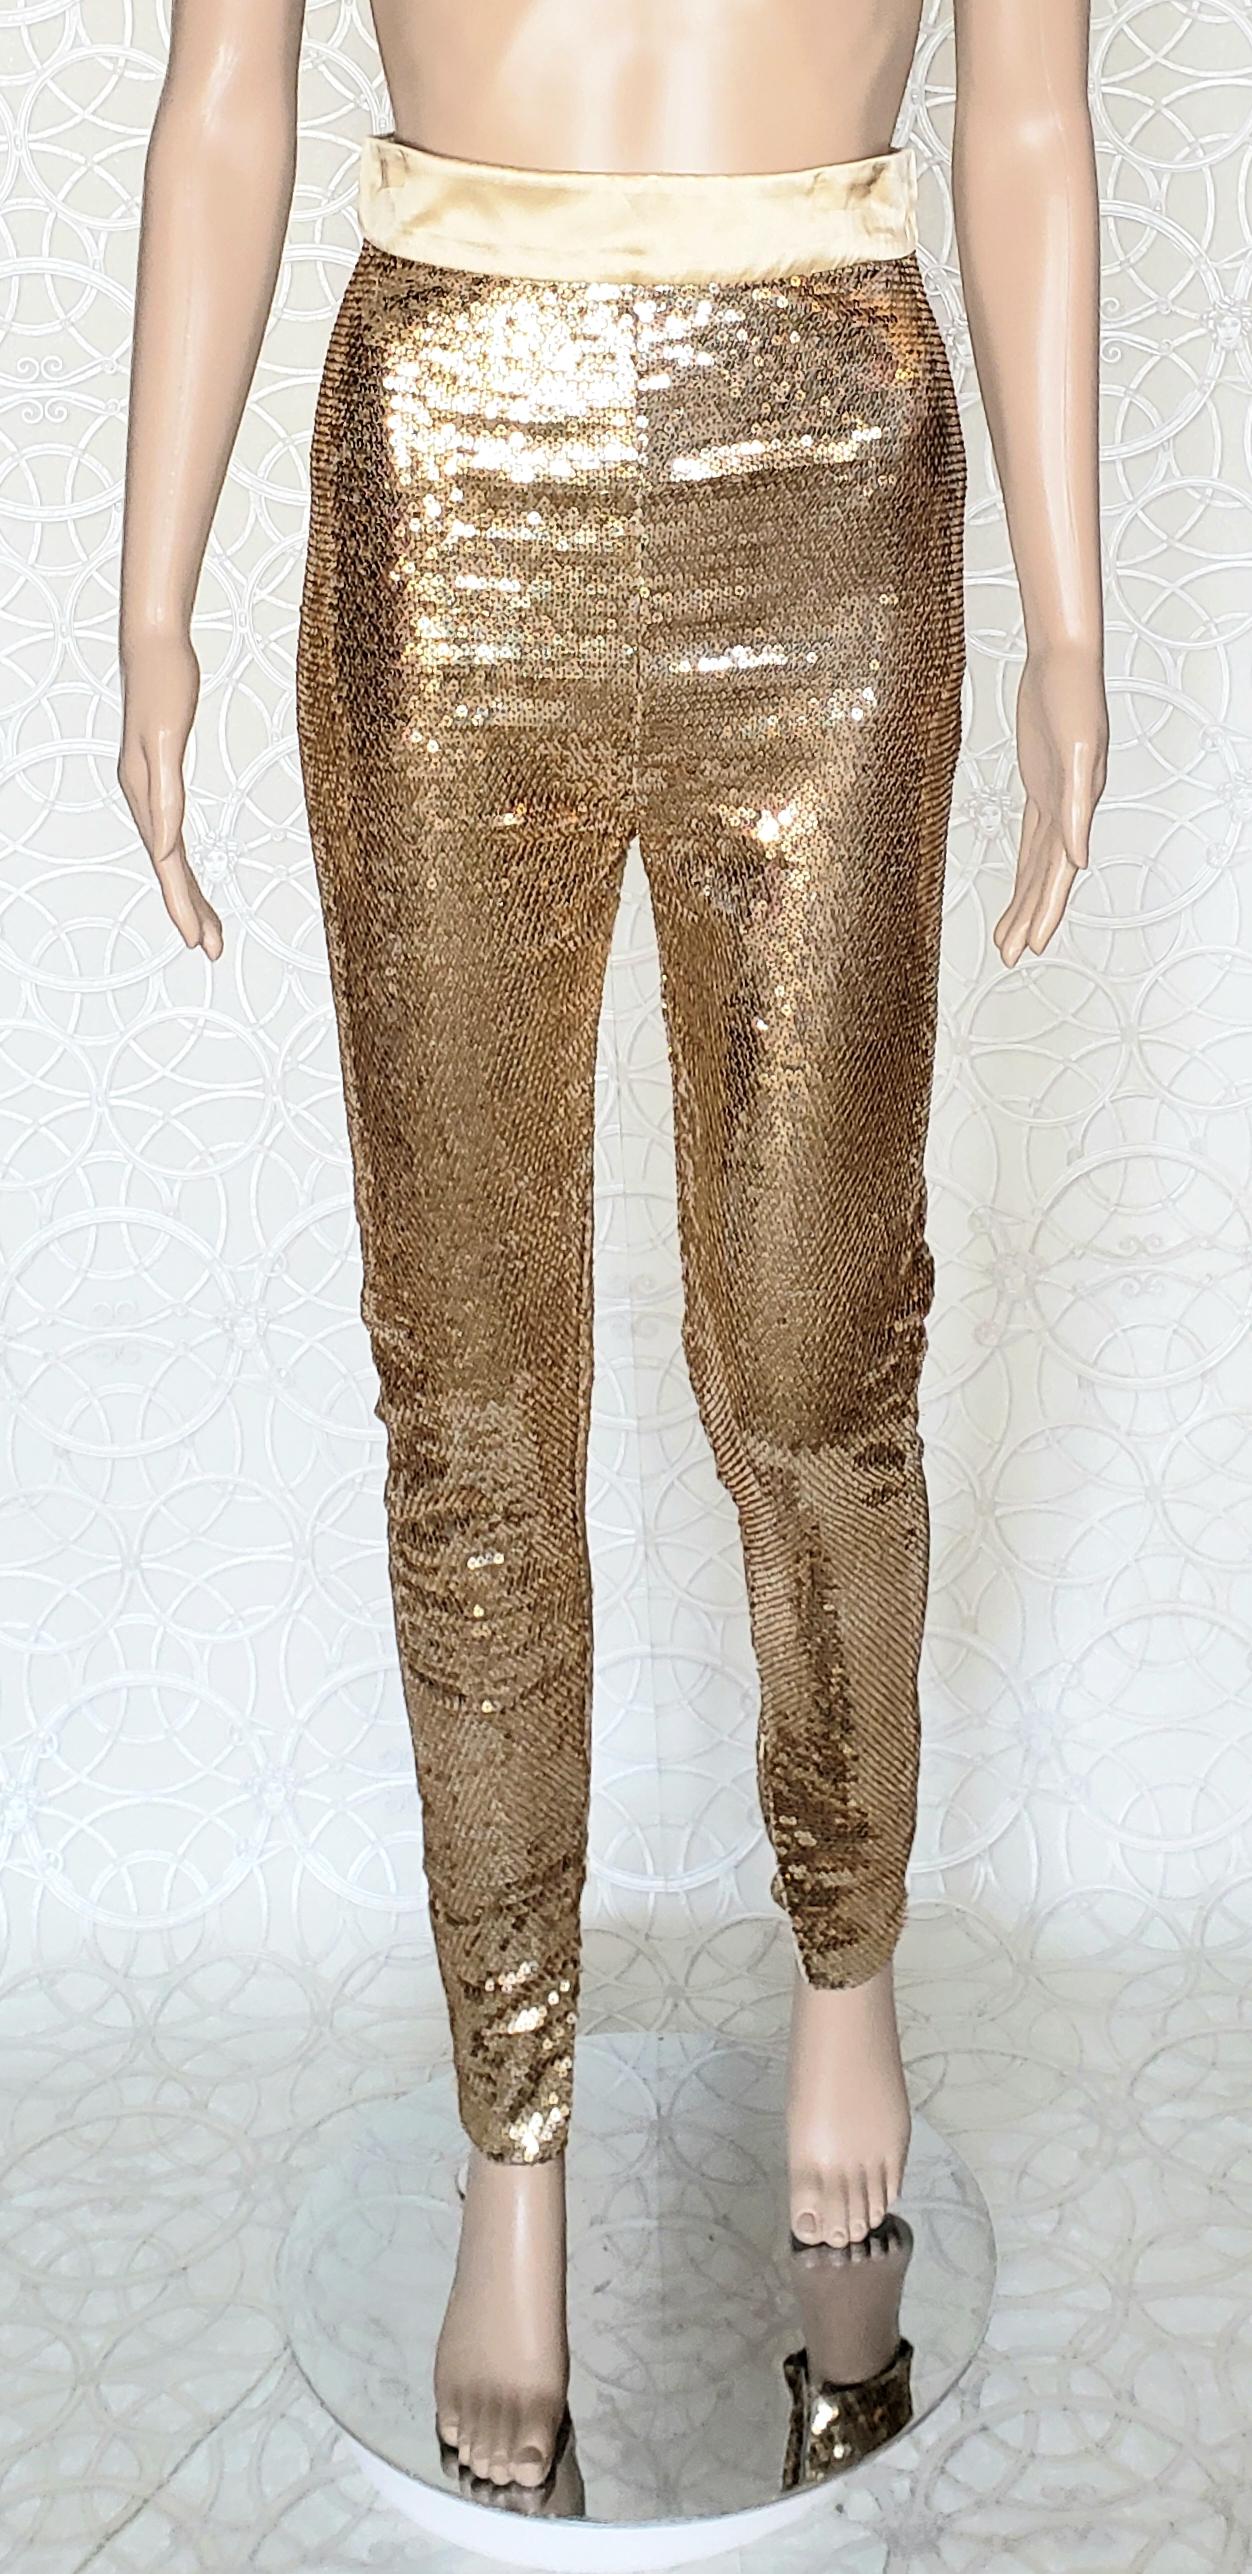 New TOM FORD NUDE EMBELLISHED CHIFFON DRESS w/ GOLD SEQUIN PANTS 38 - 2 1